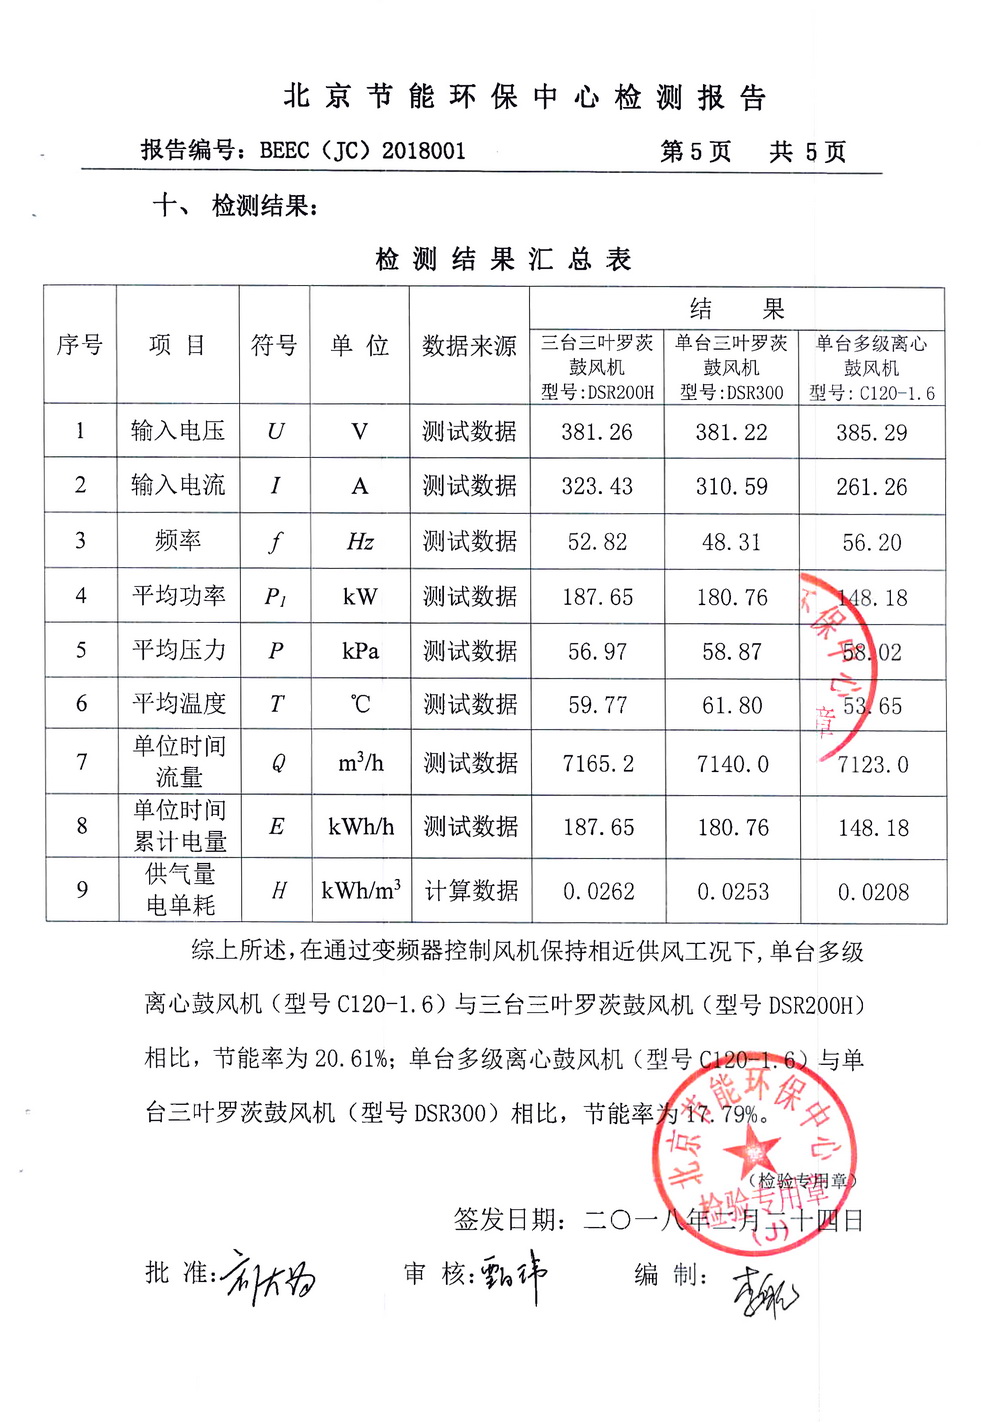 Beijing Energy Saving and Environmental Protection Center Test Report